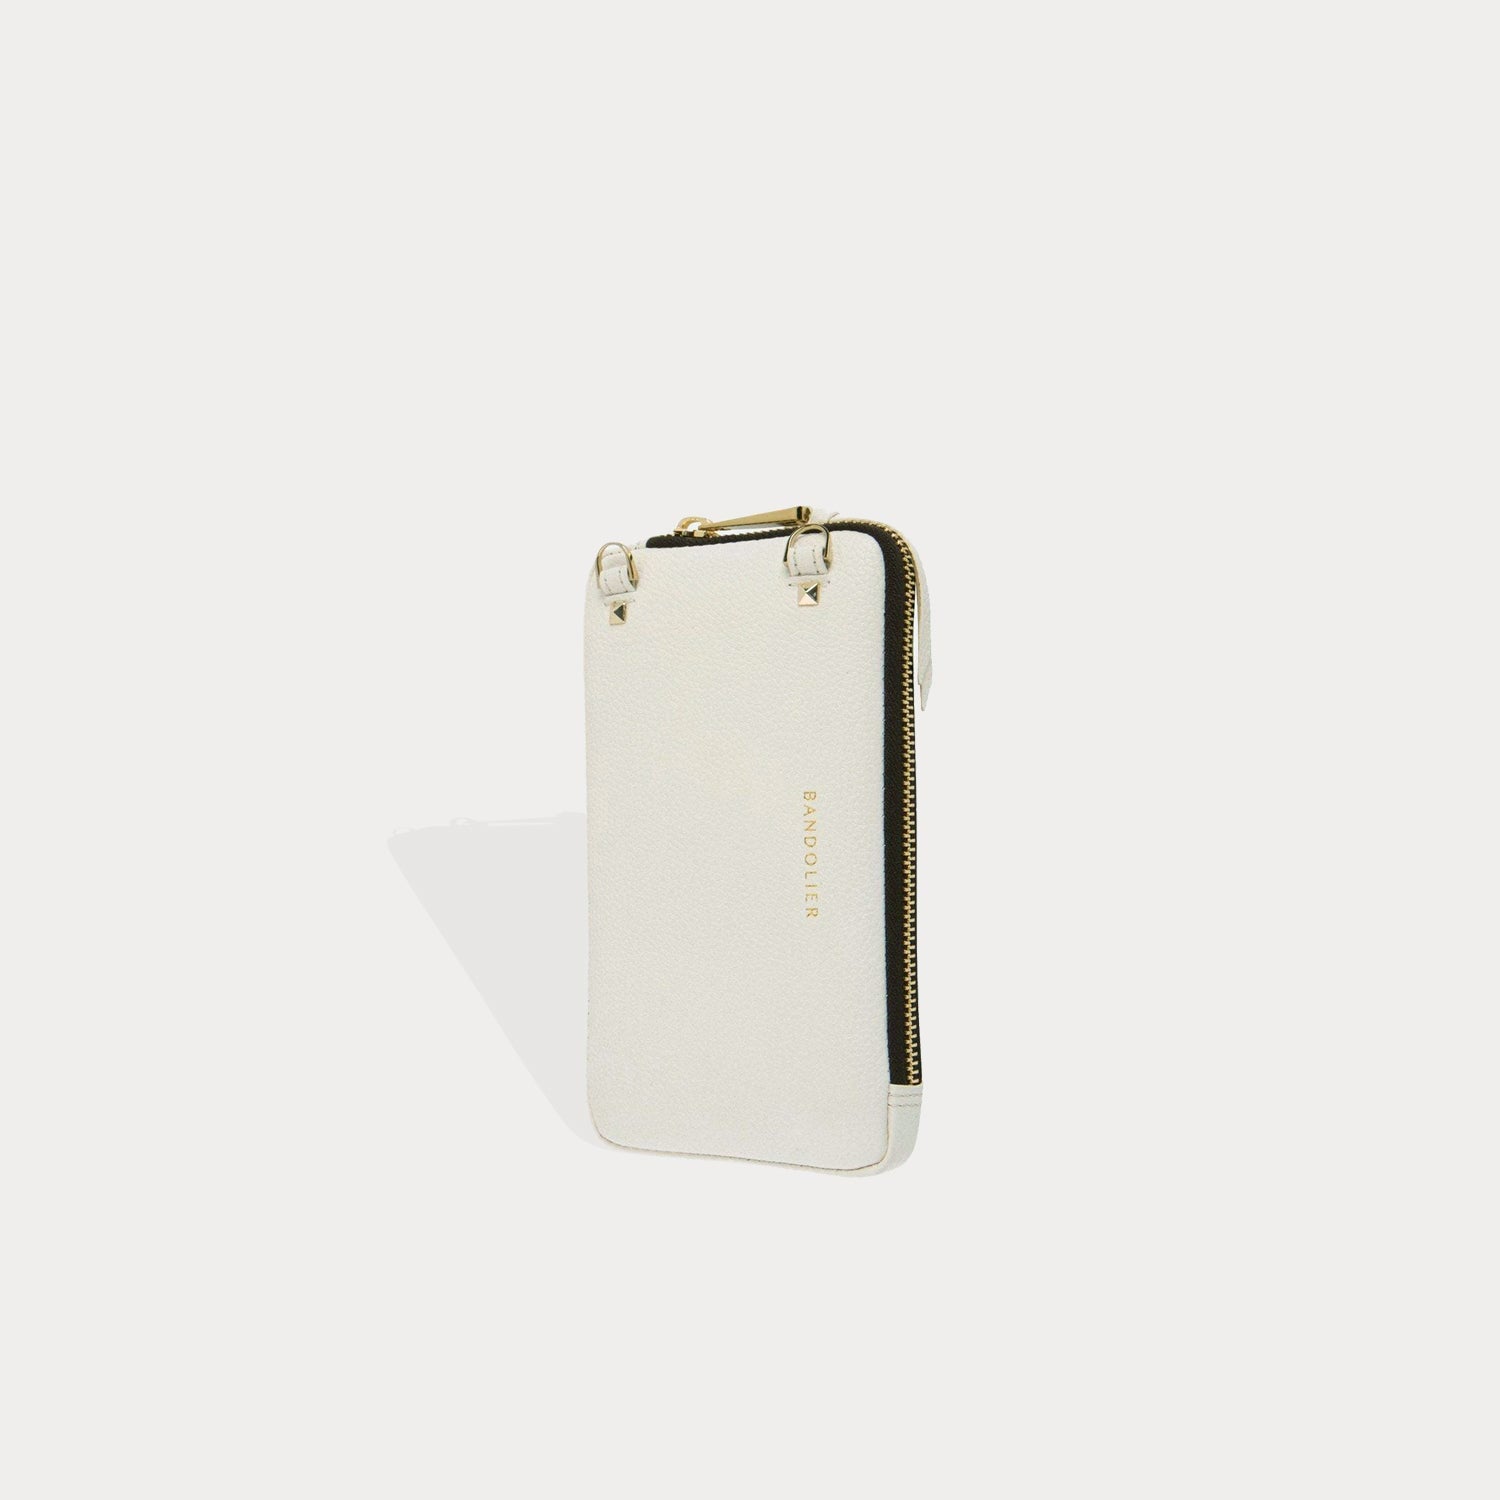 Pebble Leather Expanded Zip Pouch - Ivory/Gold